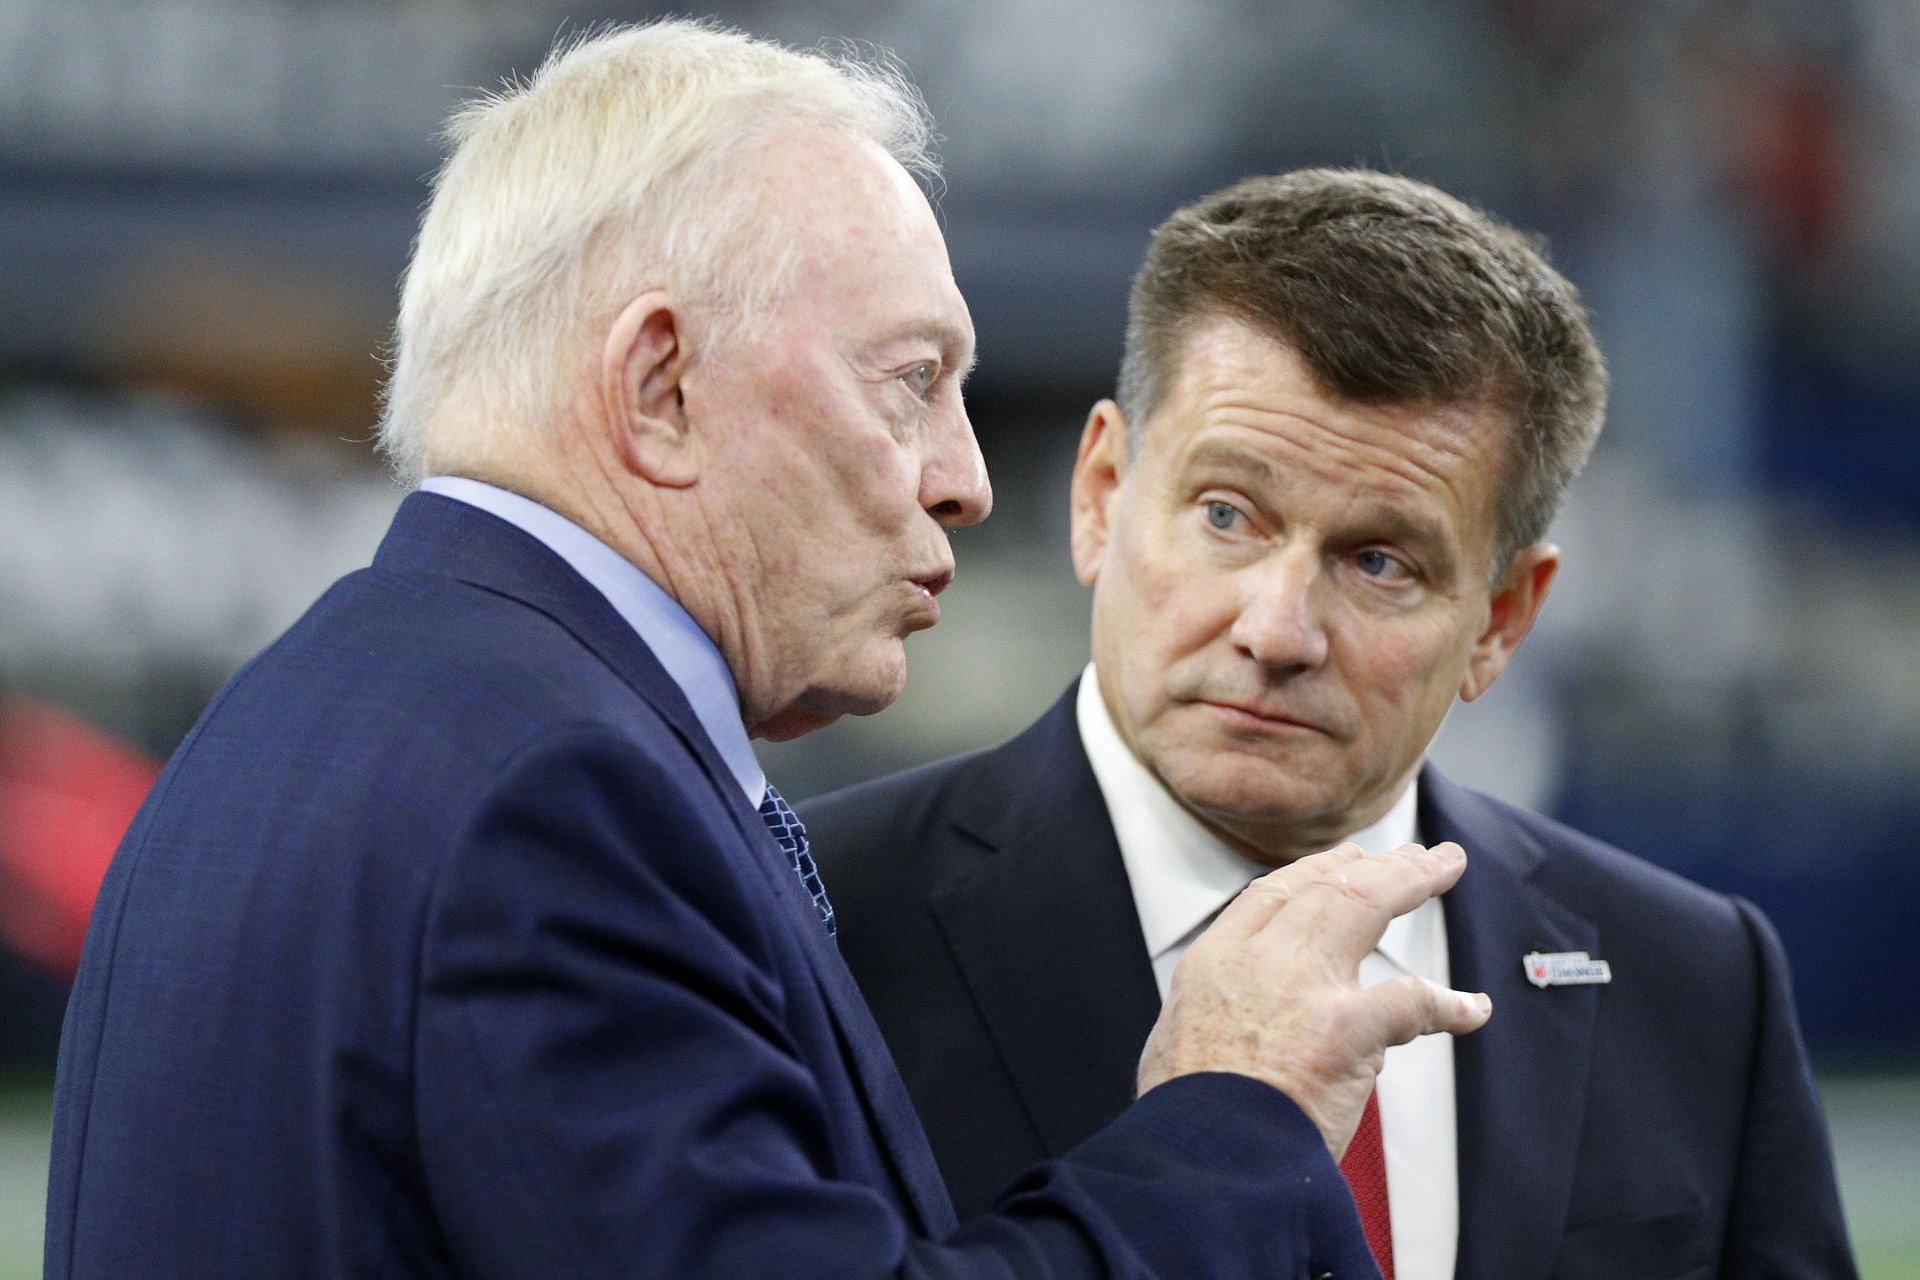 The Cowboys owner will not be attending the Scouting Combine this year